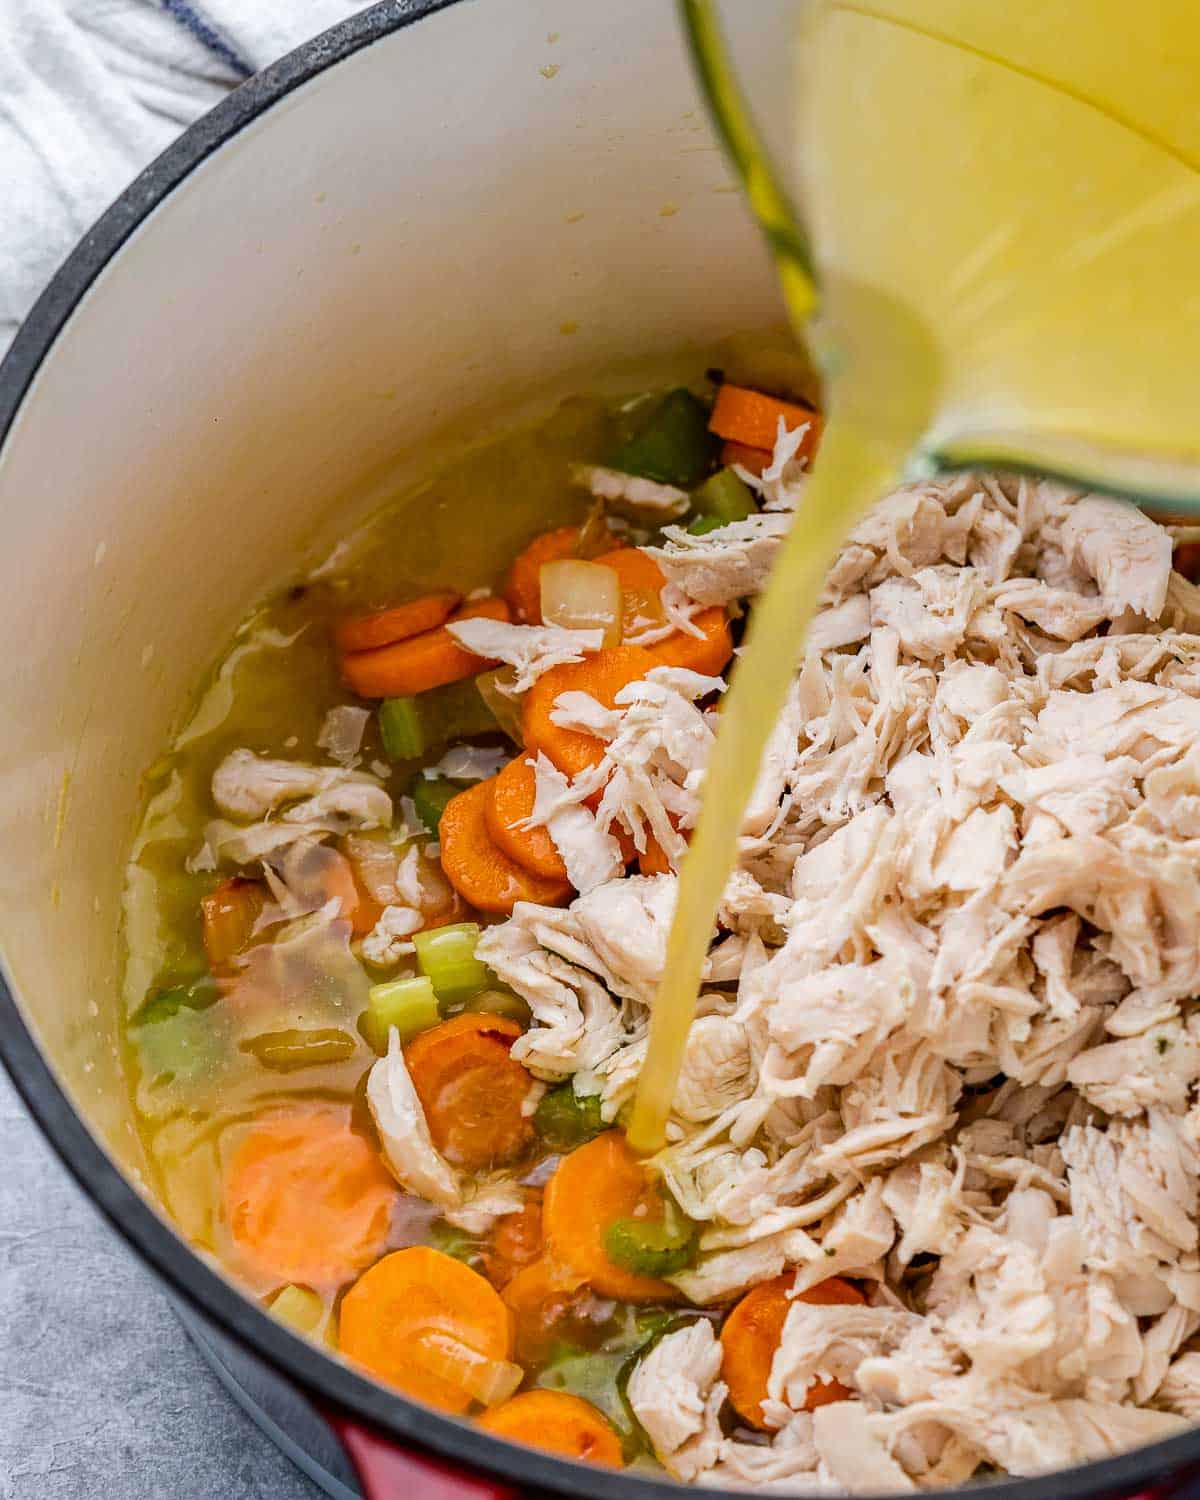 Pouring broth into a pot with turkey and vegetables.